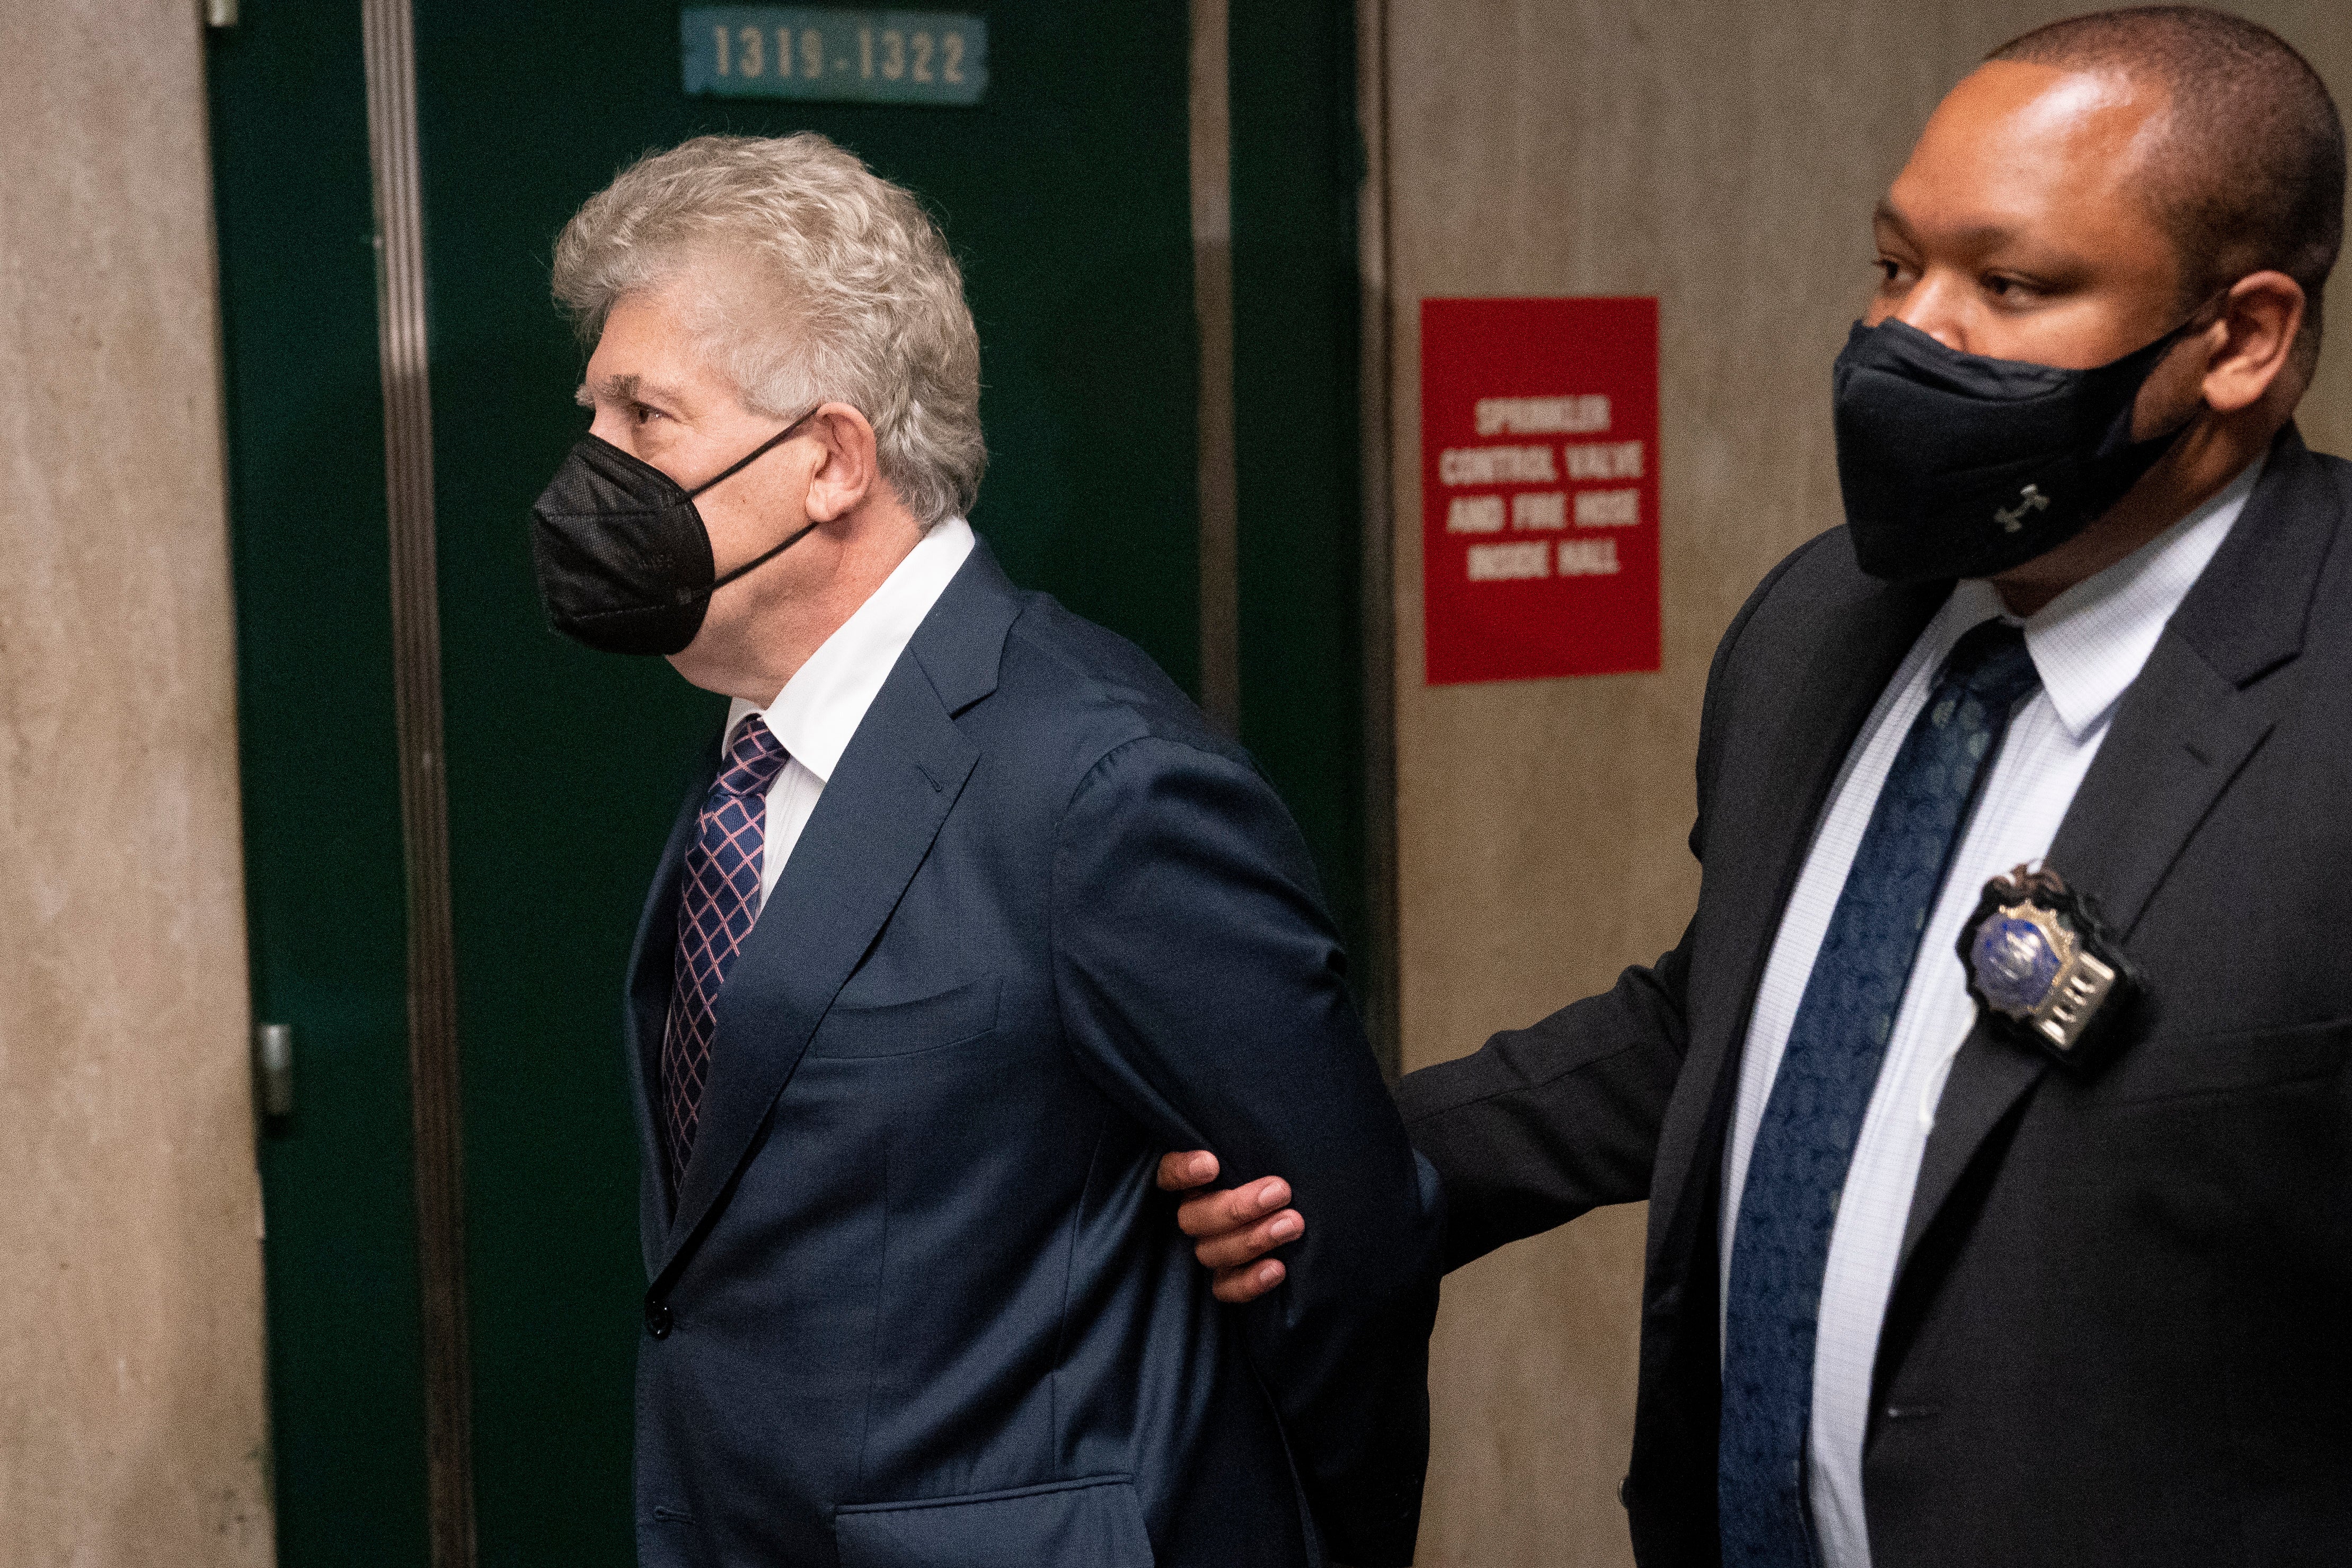 Glenn Horowitz, left, arrives to criminal court after being indicted for conspiracy involving handwritten notes